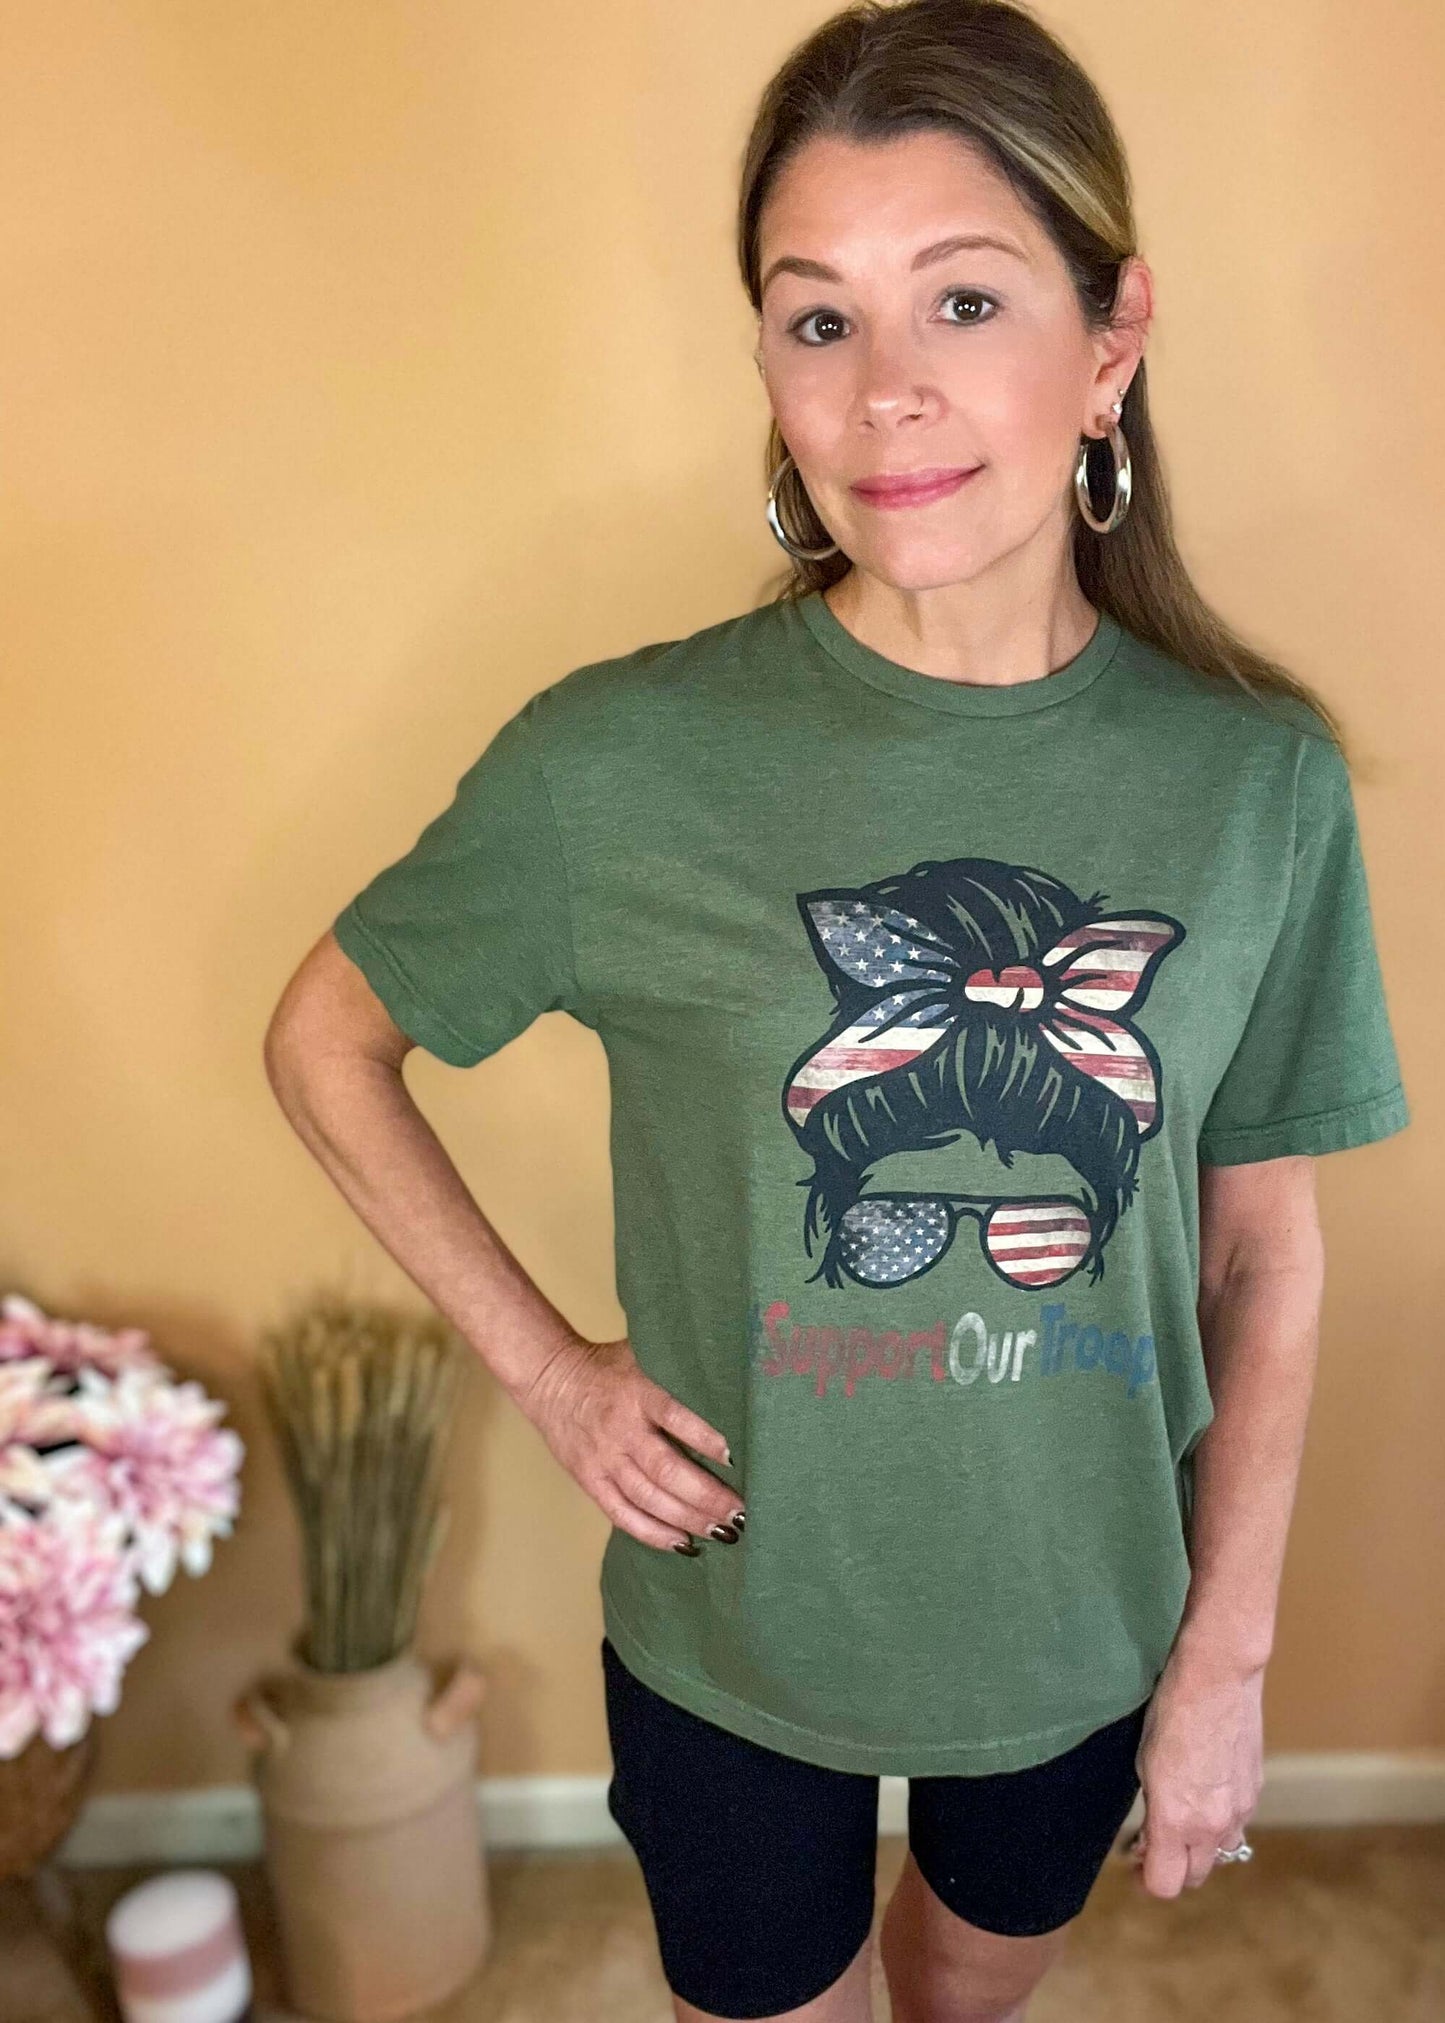 Shirts & Tops #supportourtroops, clothing, fall graphic tees, Gildan tee, Graphic Tees, messy bun graphic tee, midwest tees, patriotic, patriotic graphic tees, shirts, shirts & tops, unisex fit tee Size: Small, Medium, Large, Extra Large